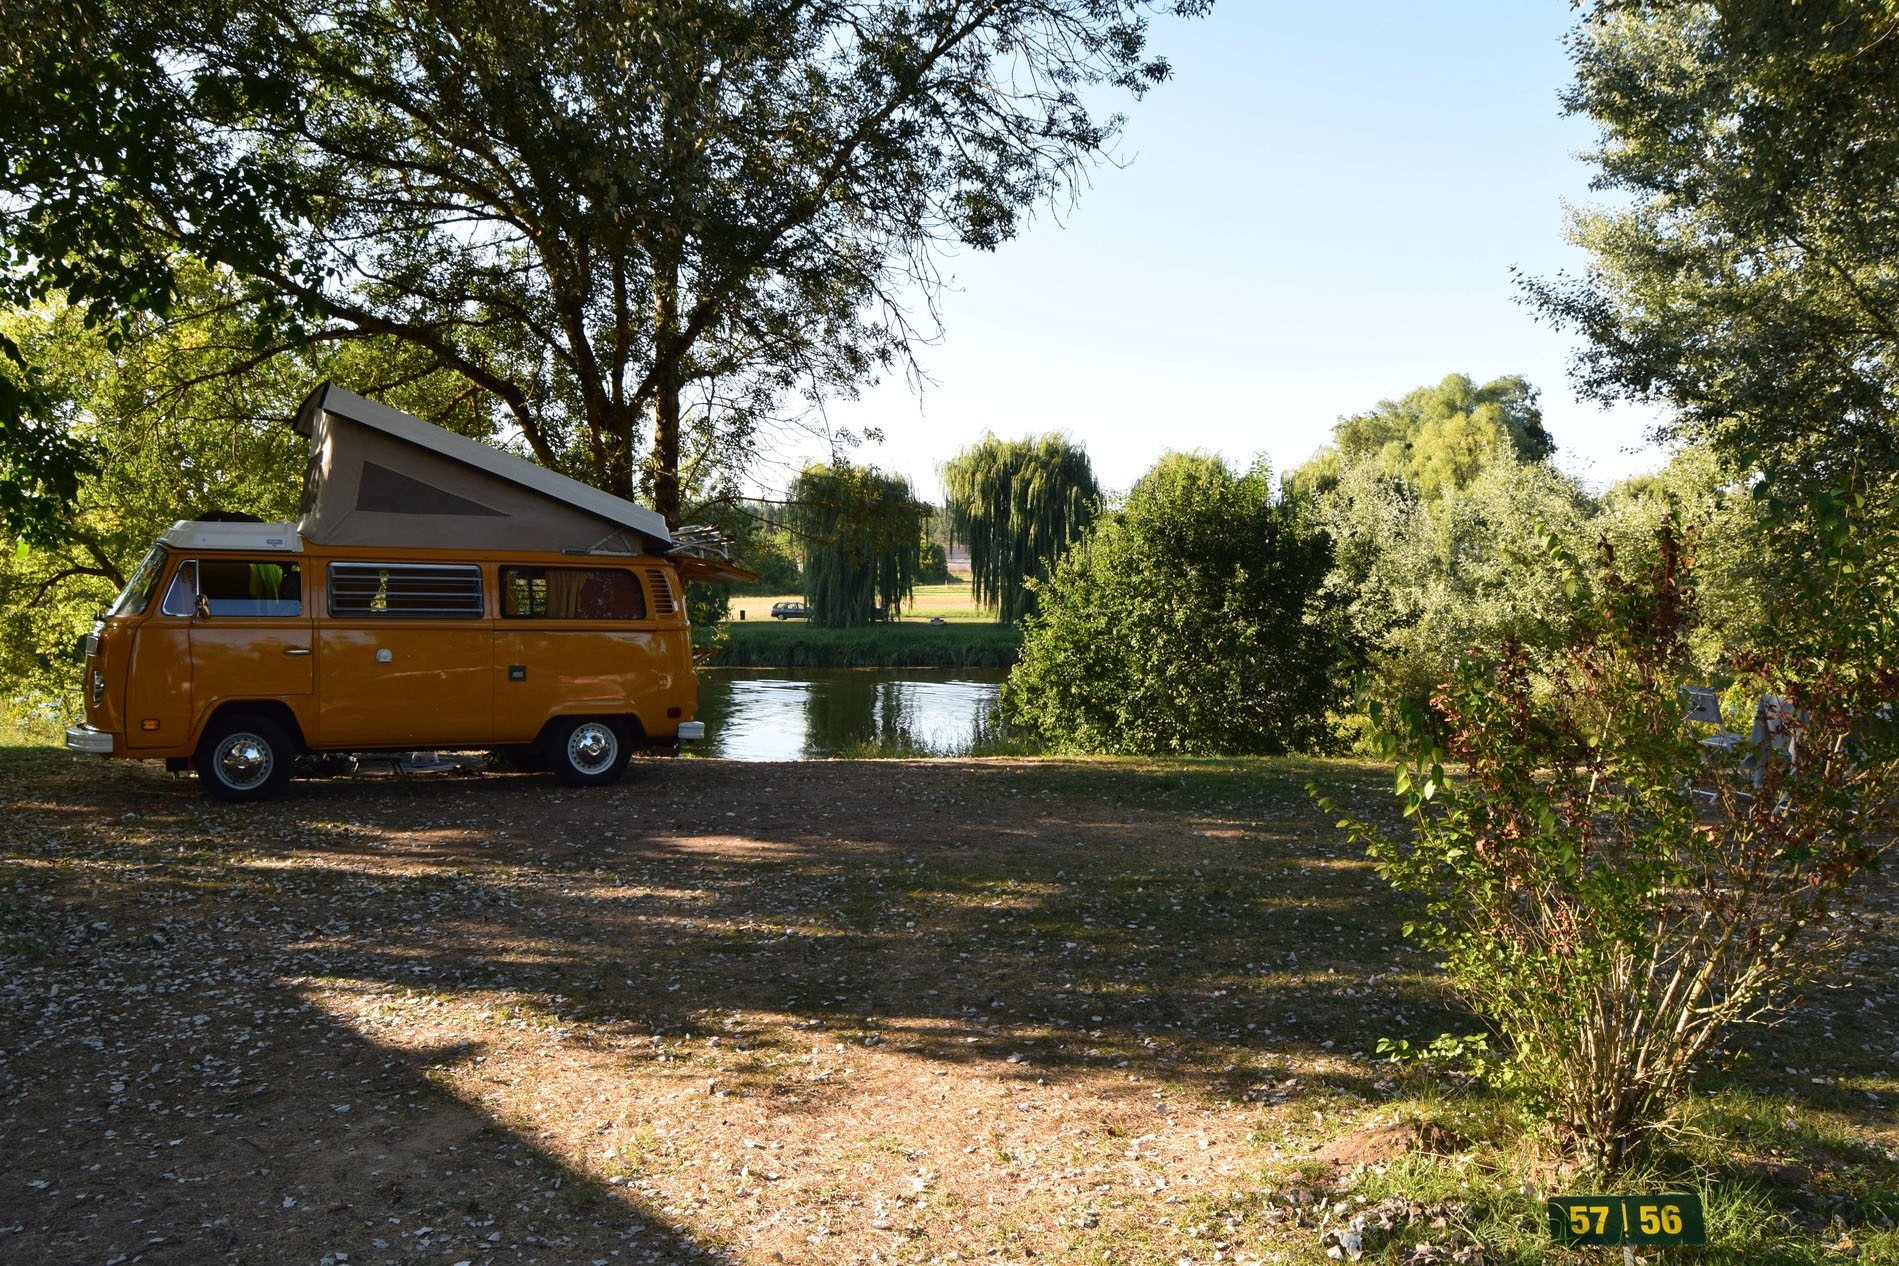 Camping Le Moulin Fort